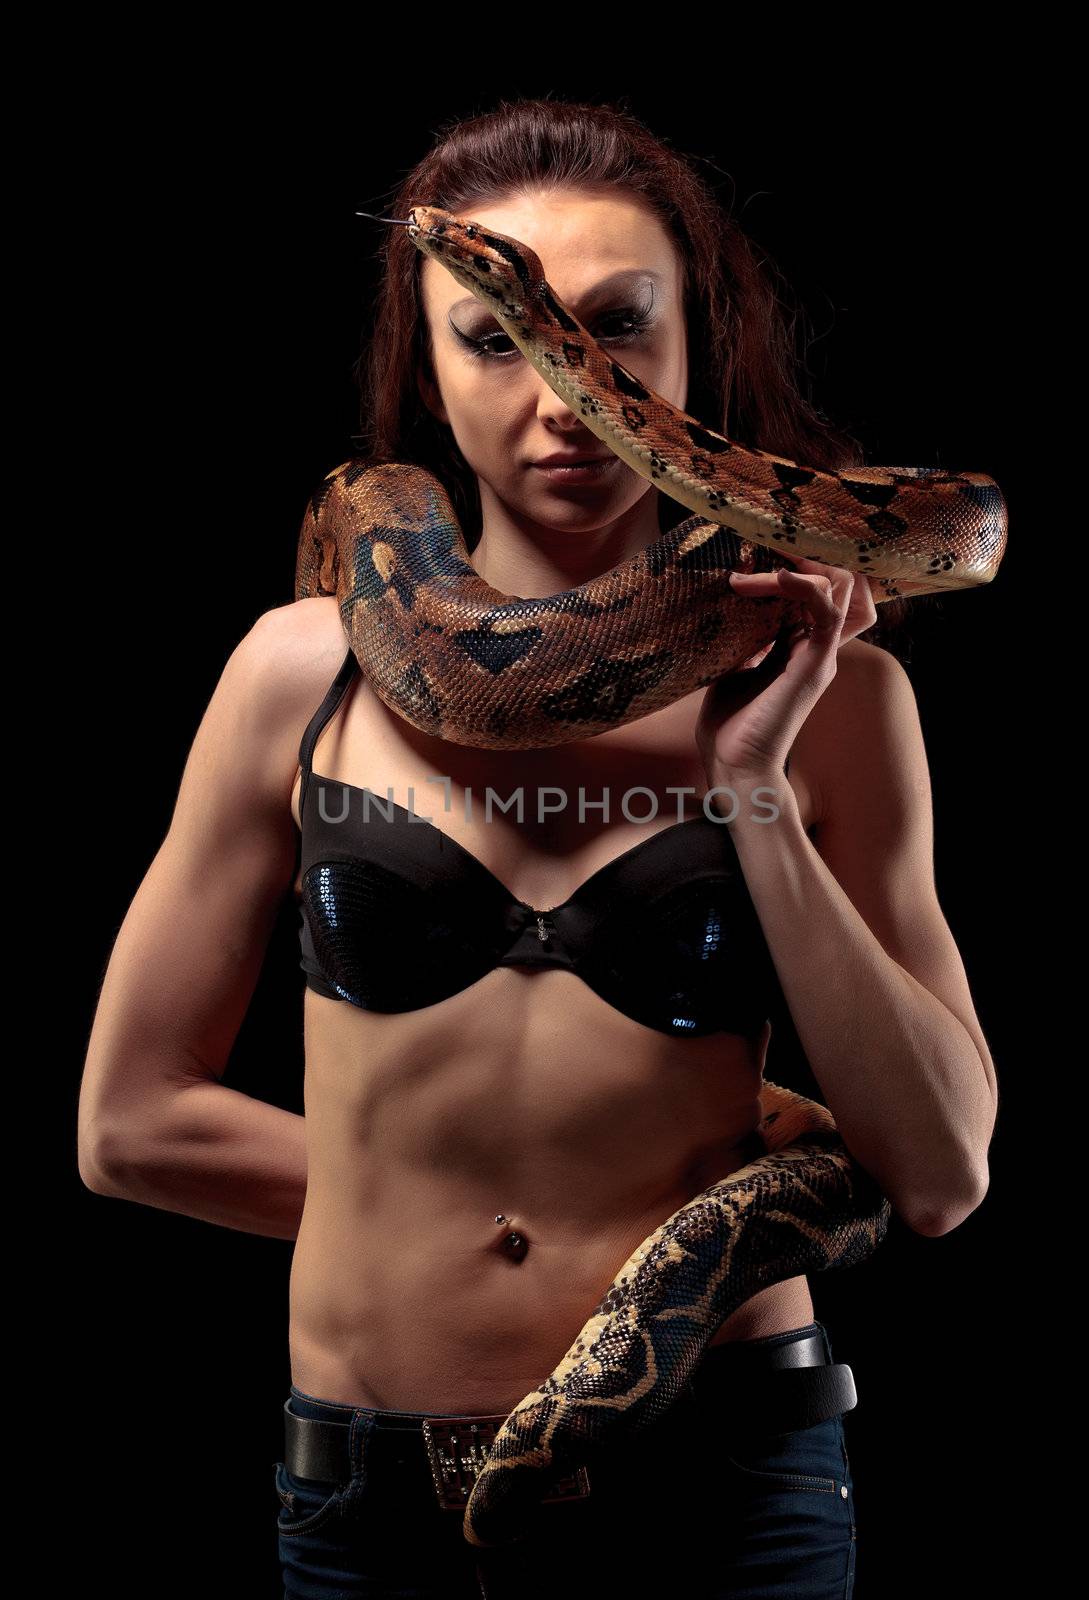 Mysterious beautiful exotic woman with a boa entwined around her body standing in shadows on a dark background